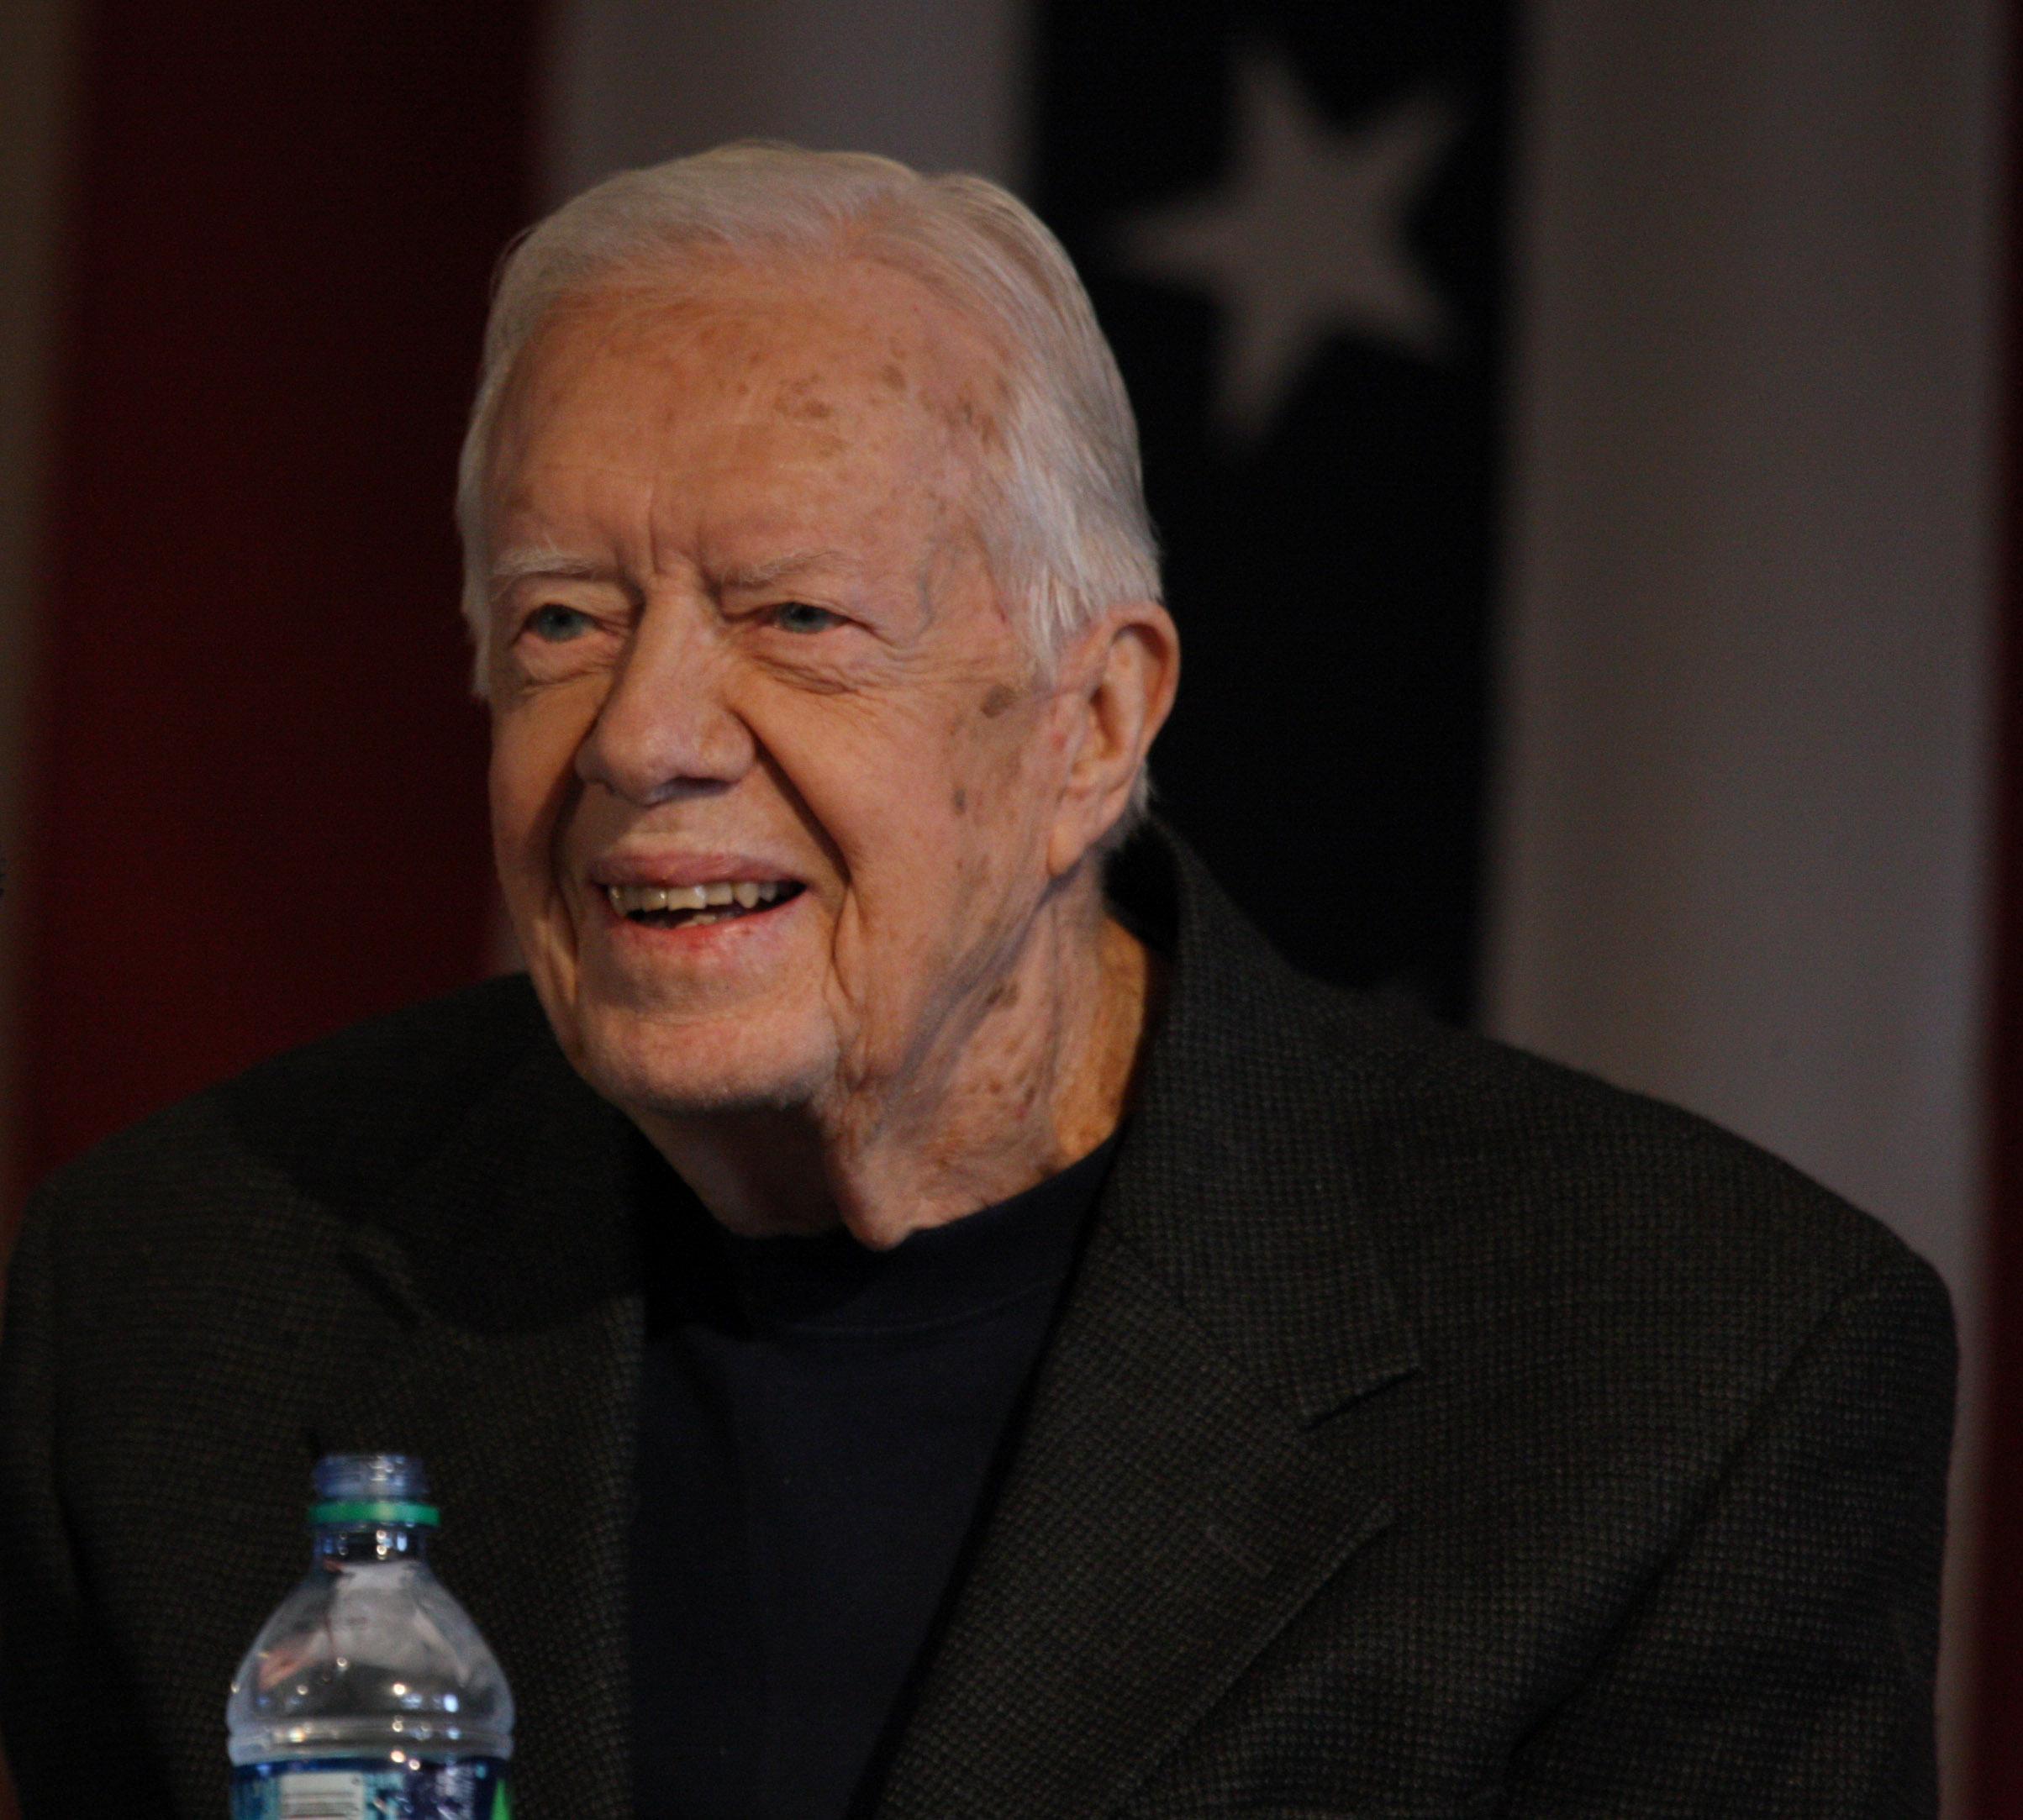 Jimmy Carter speaking to the crowd; Presidents' Day 2016